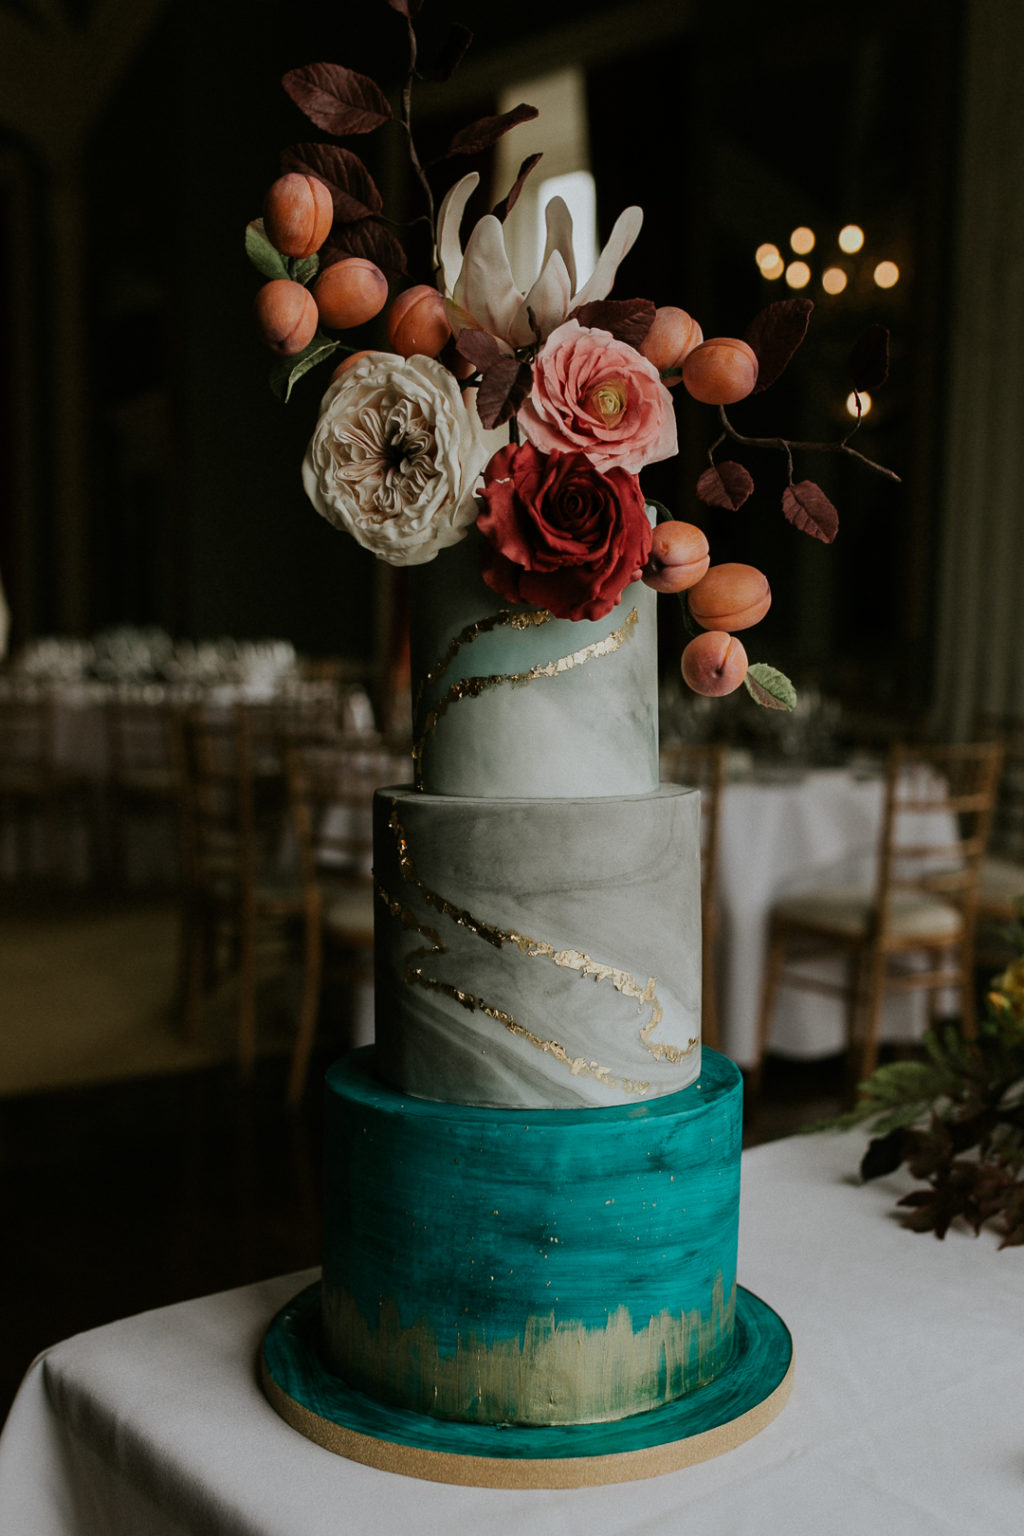 The wedding cake was a grey marble one, with a bold turquoise tier, metallic touches, lush blooms, foliage and apricots